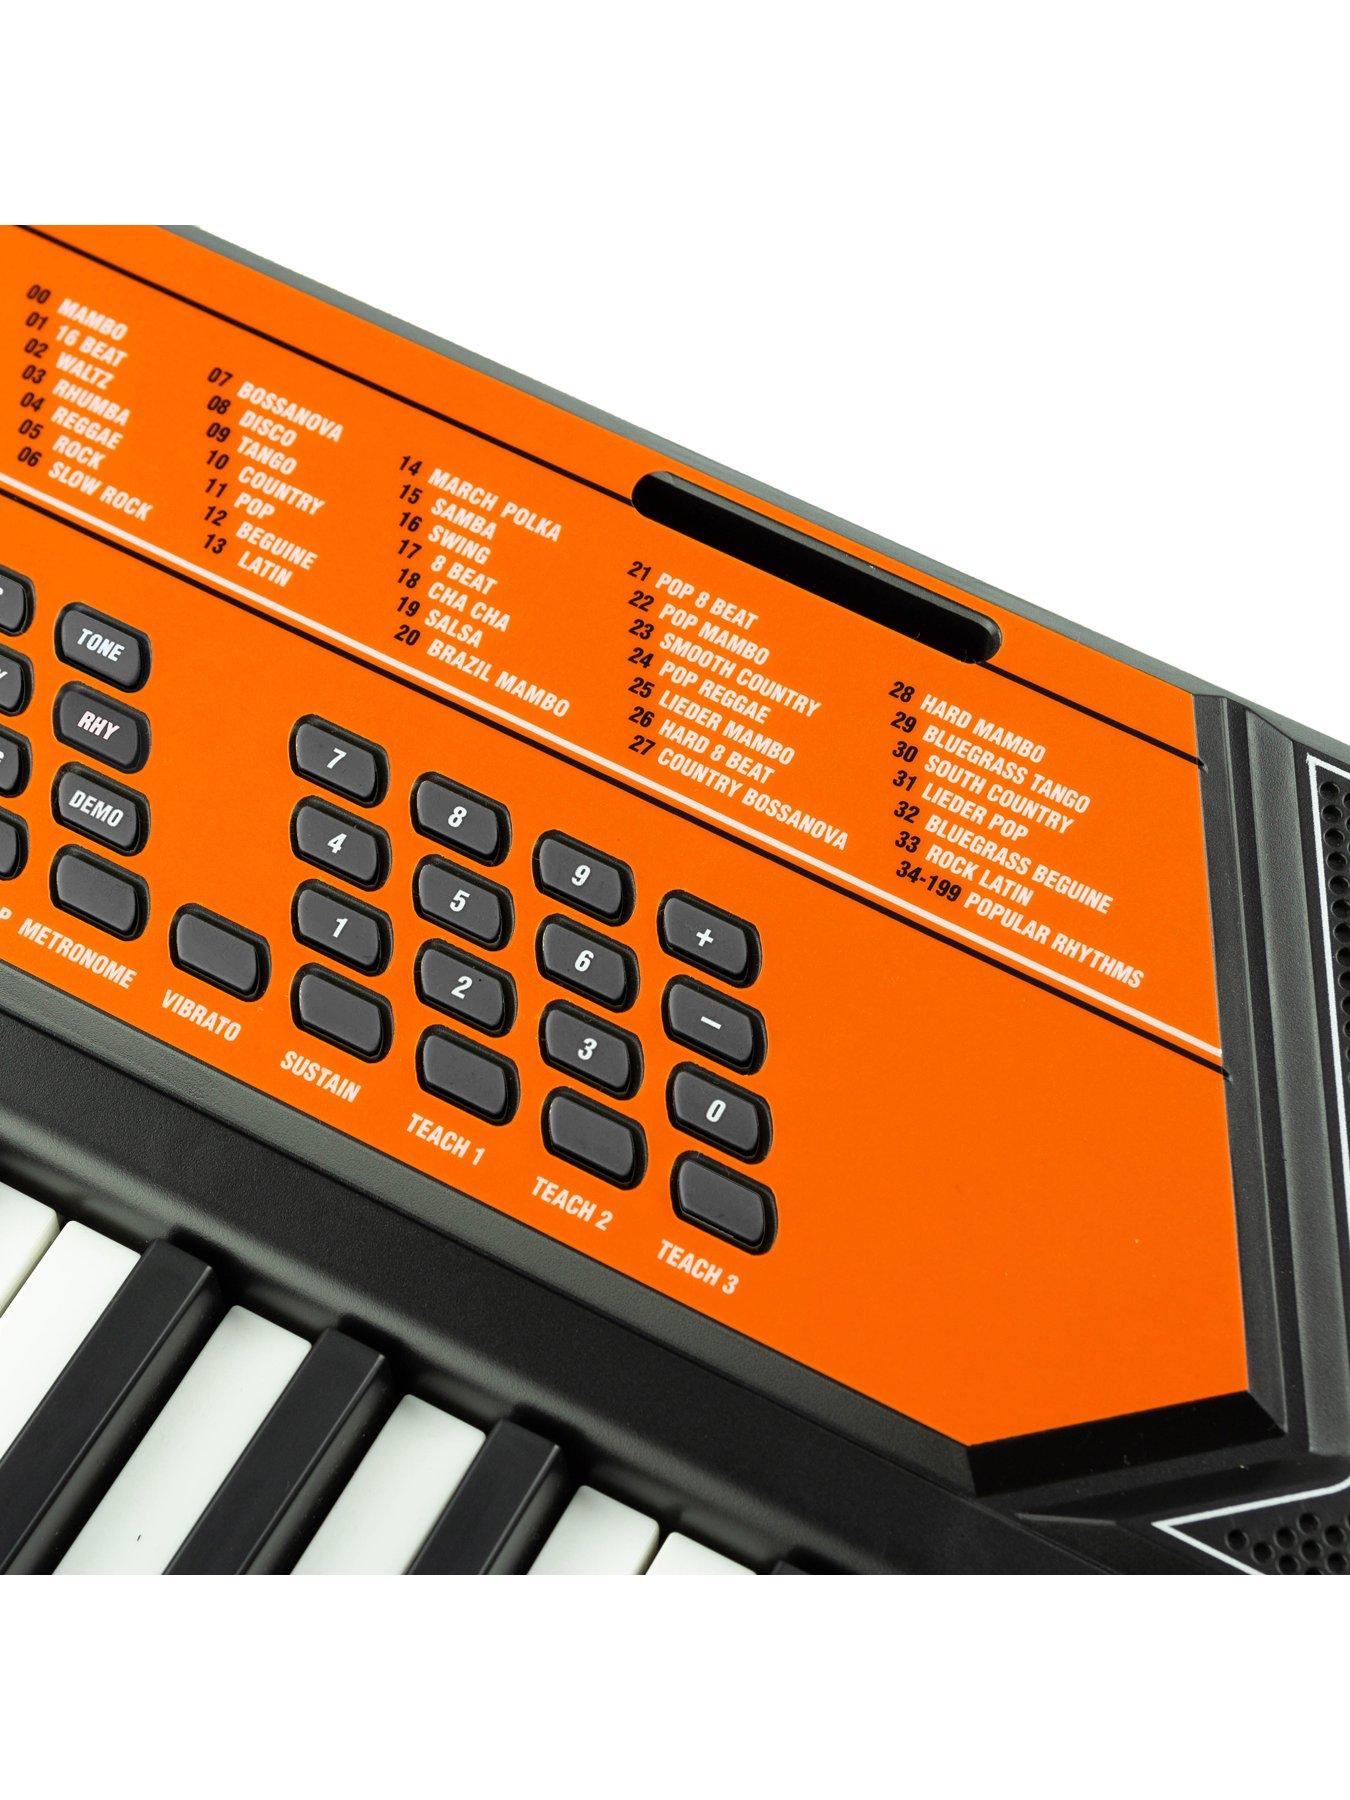 The RockJam Keyboard Piano Features *SURPRISED* Me 